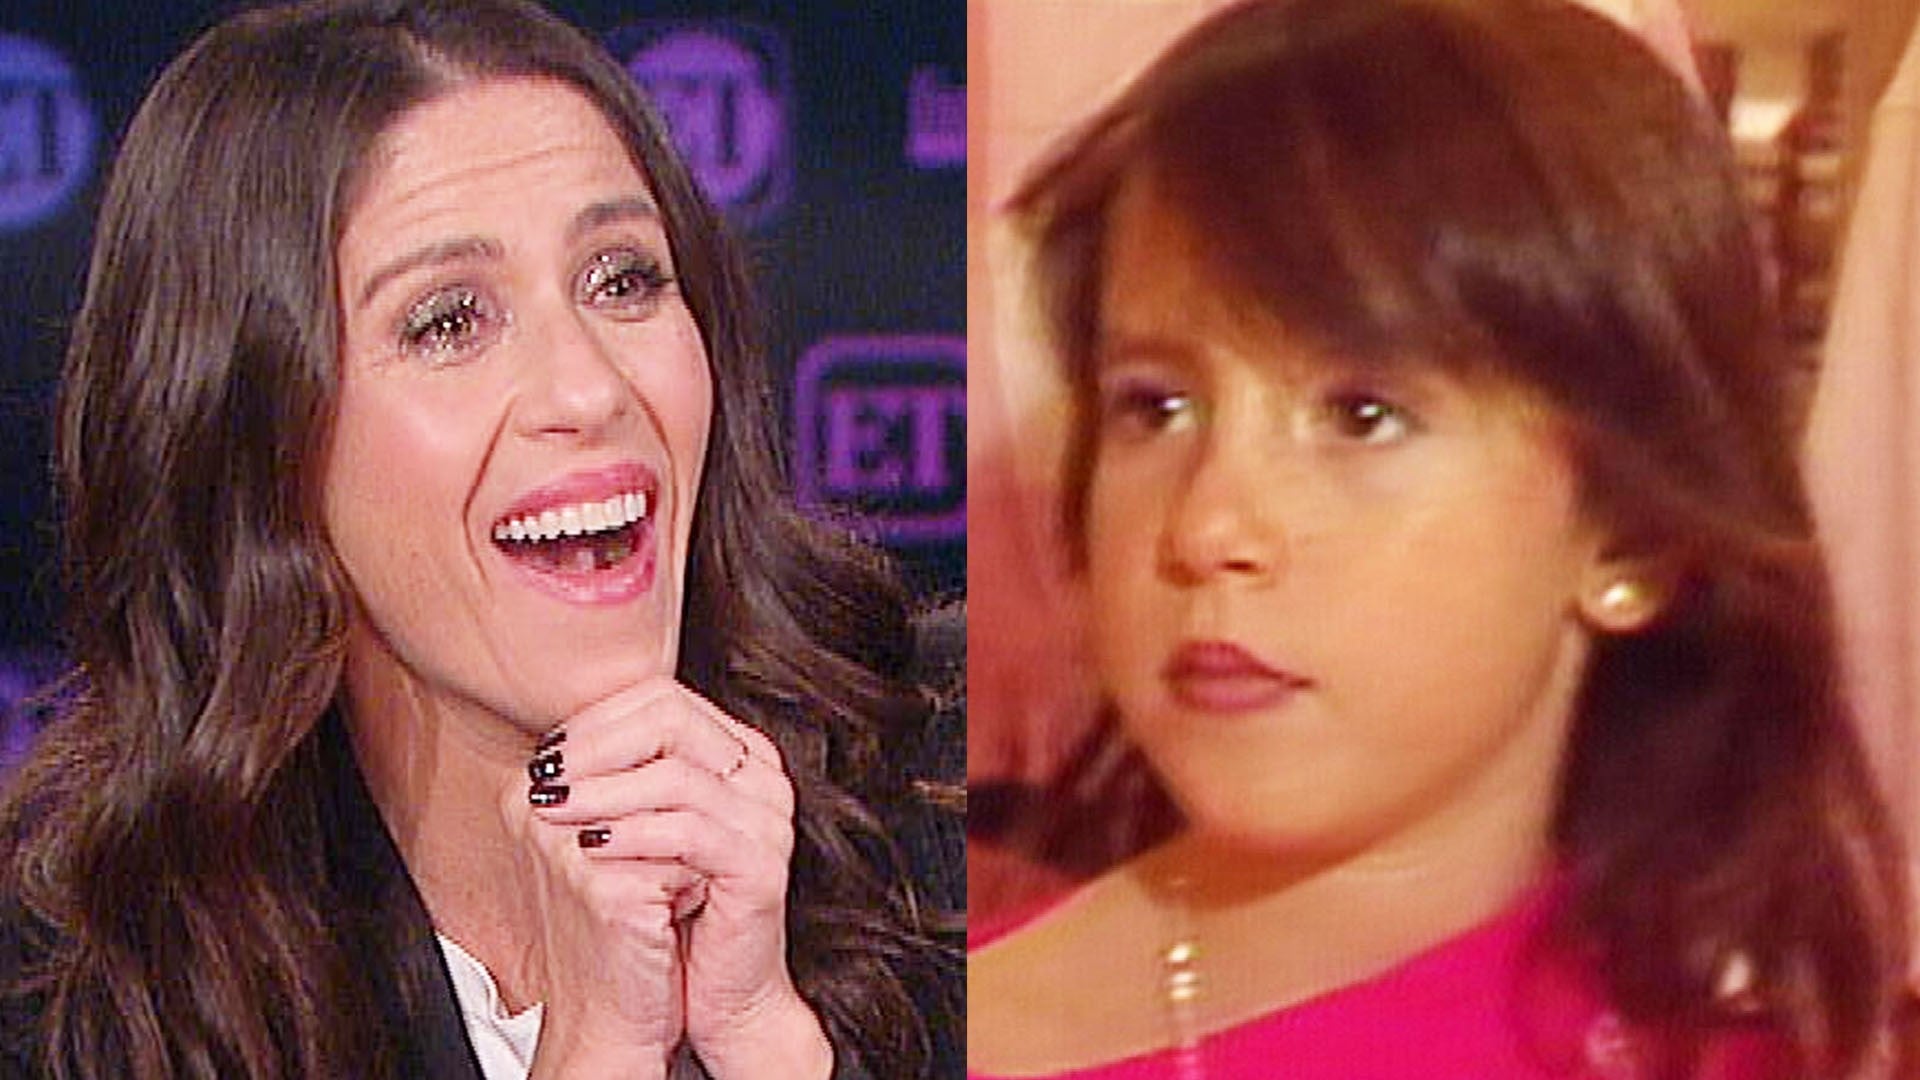 ahmed sophy recommends soleil moon frye nude pic